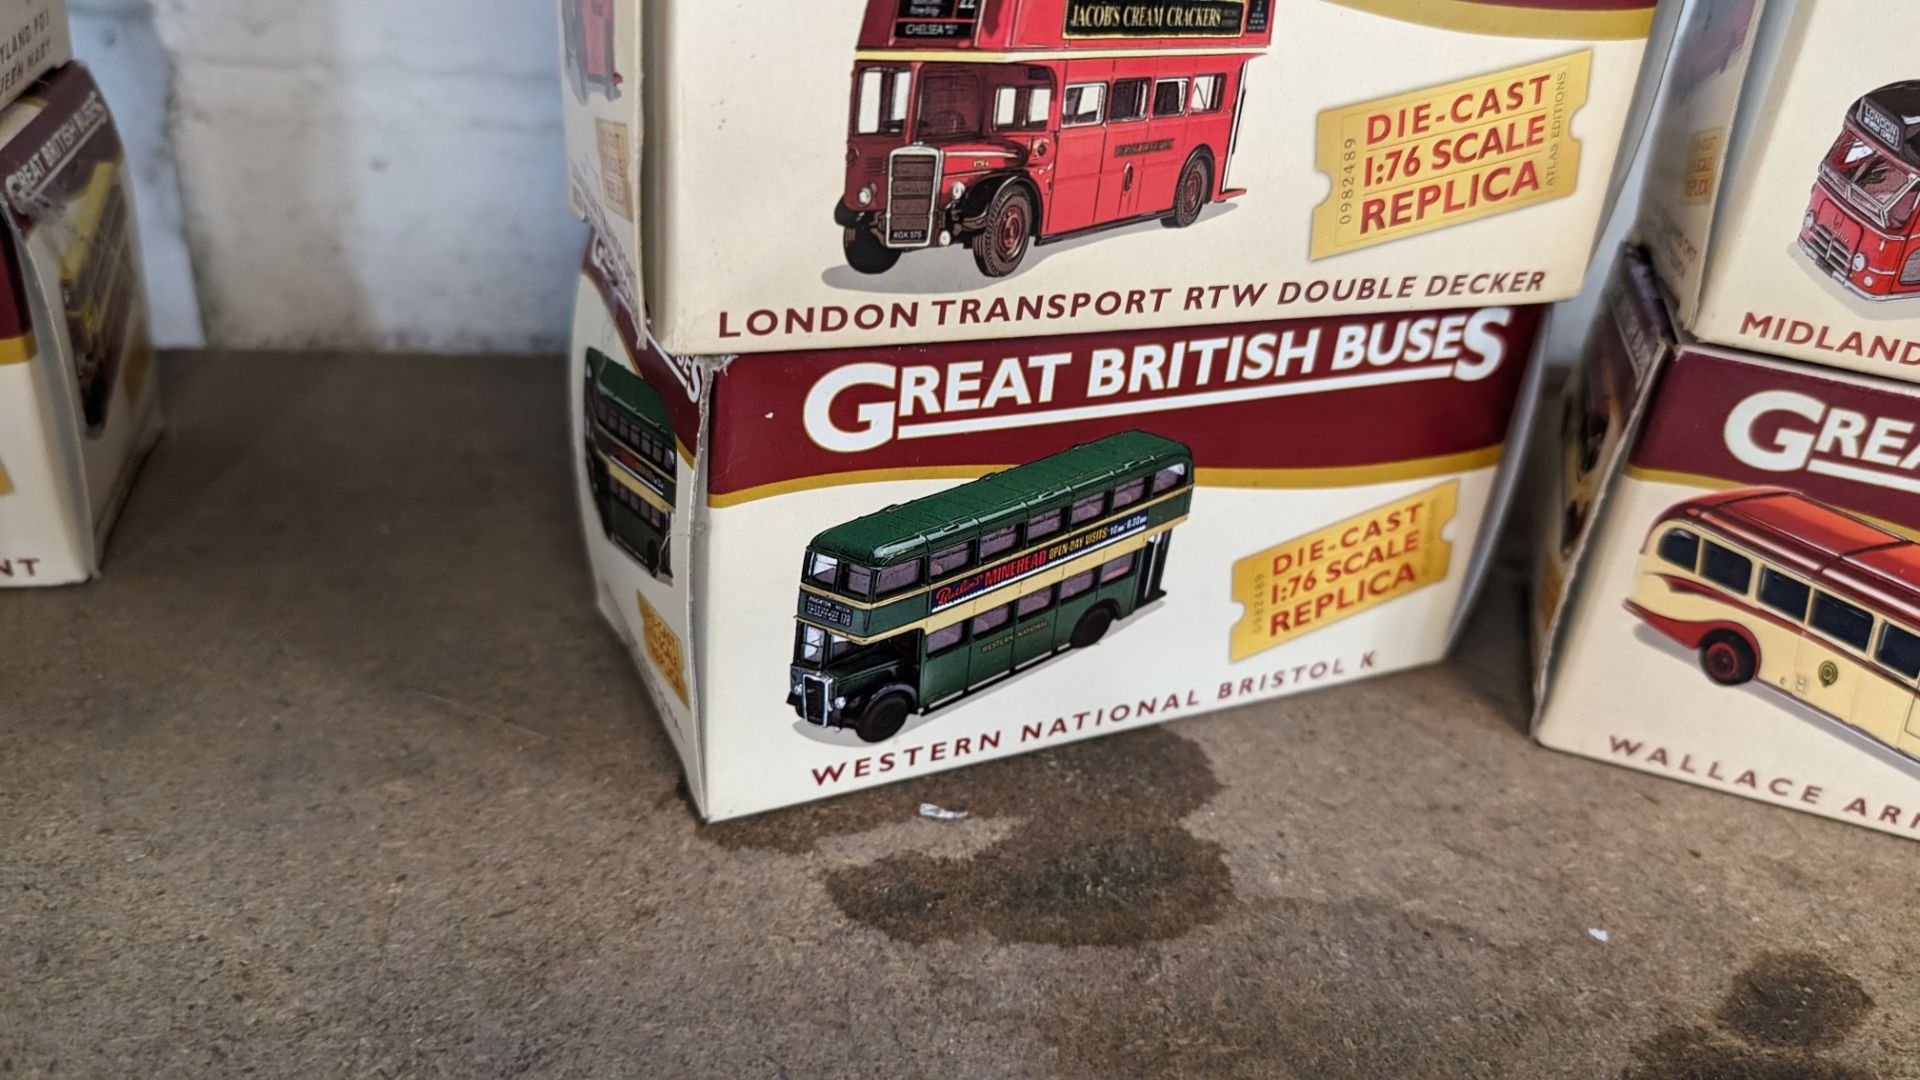 5 assorted Great British Buses die-cast replica buses, 1:76 scale - Image 5 of 9